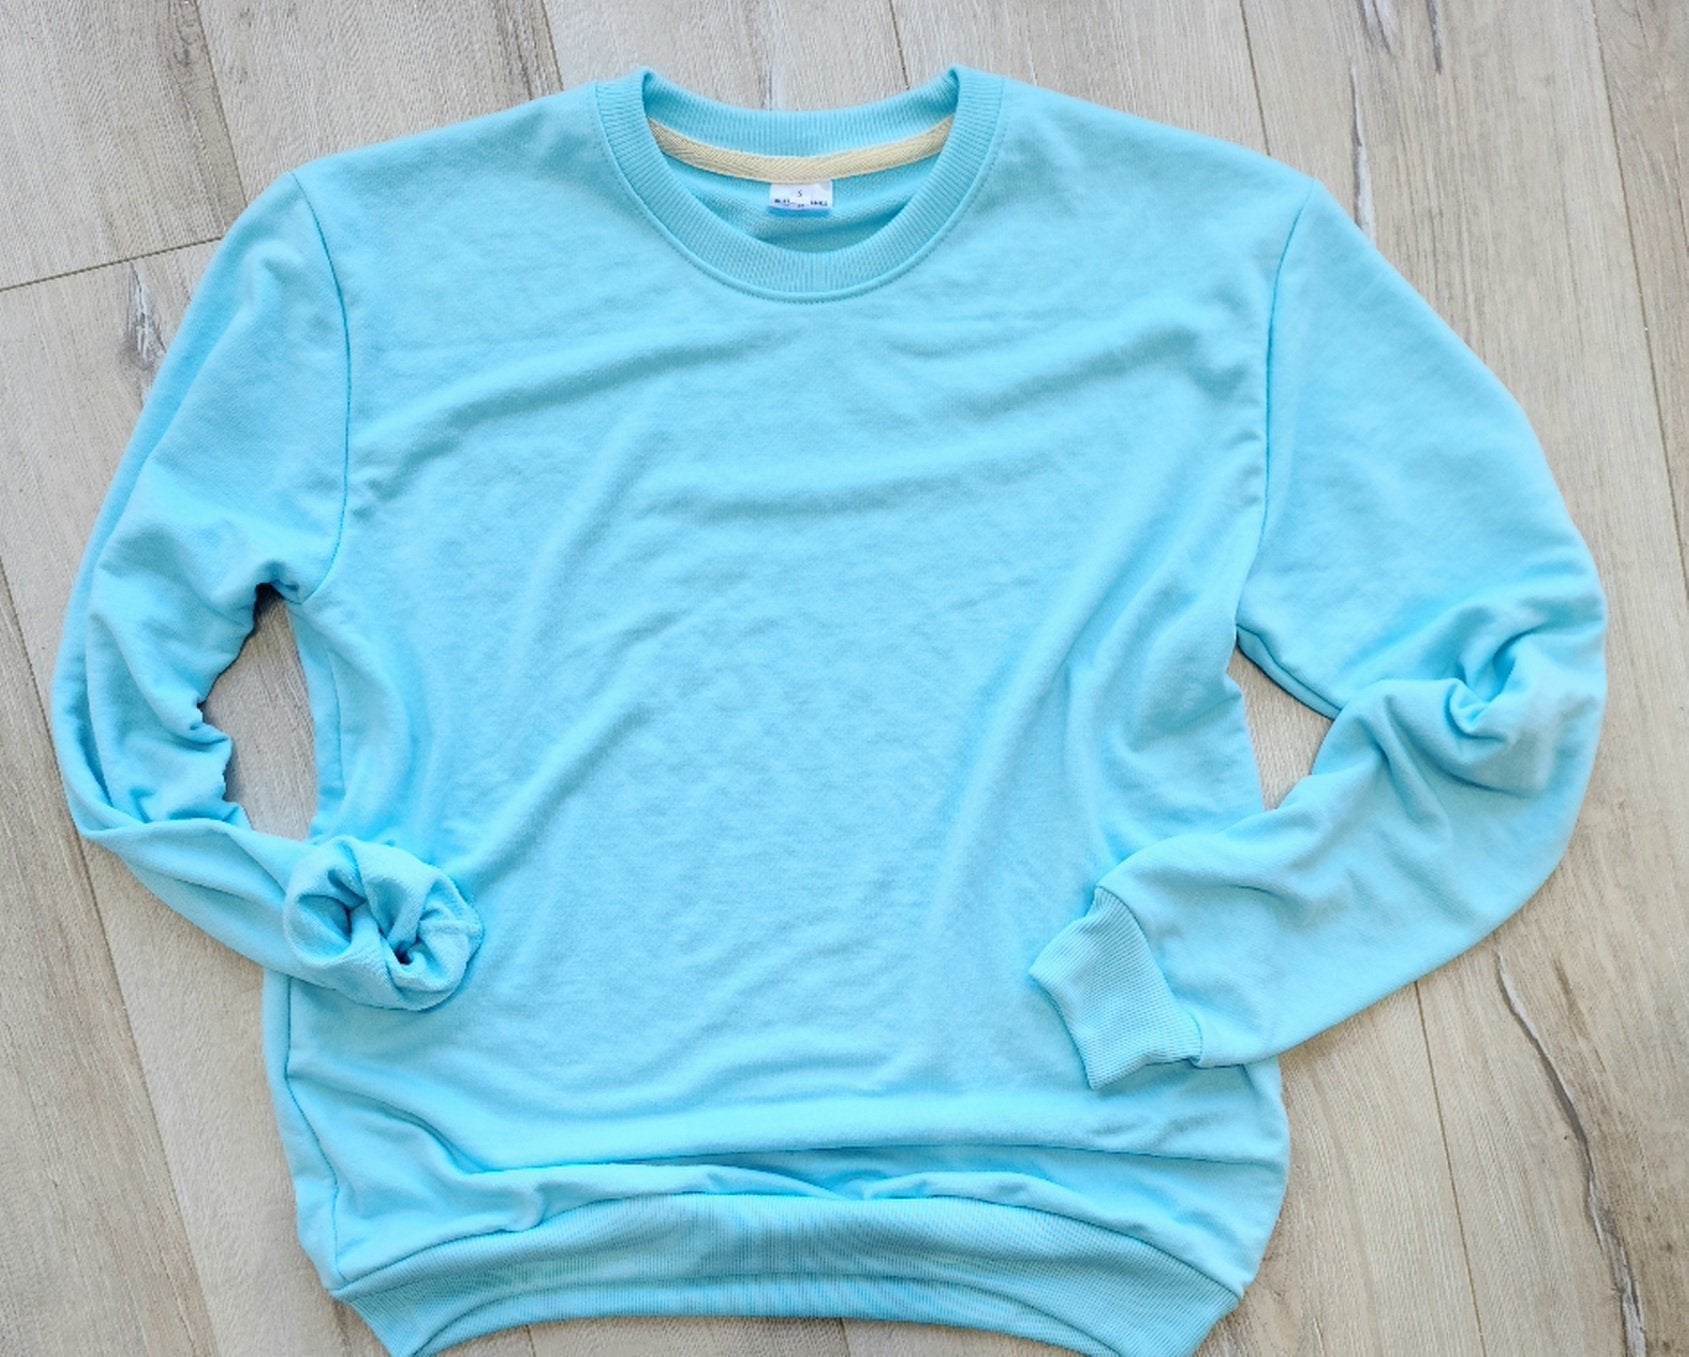 Crewneck Sweatshirt - In Stock Toddler Youth & Adult Blue / 2T